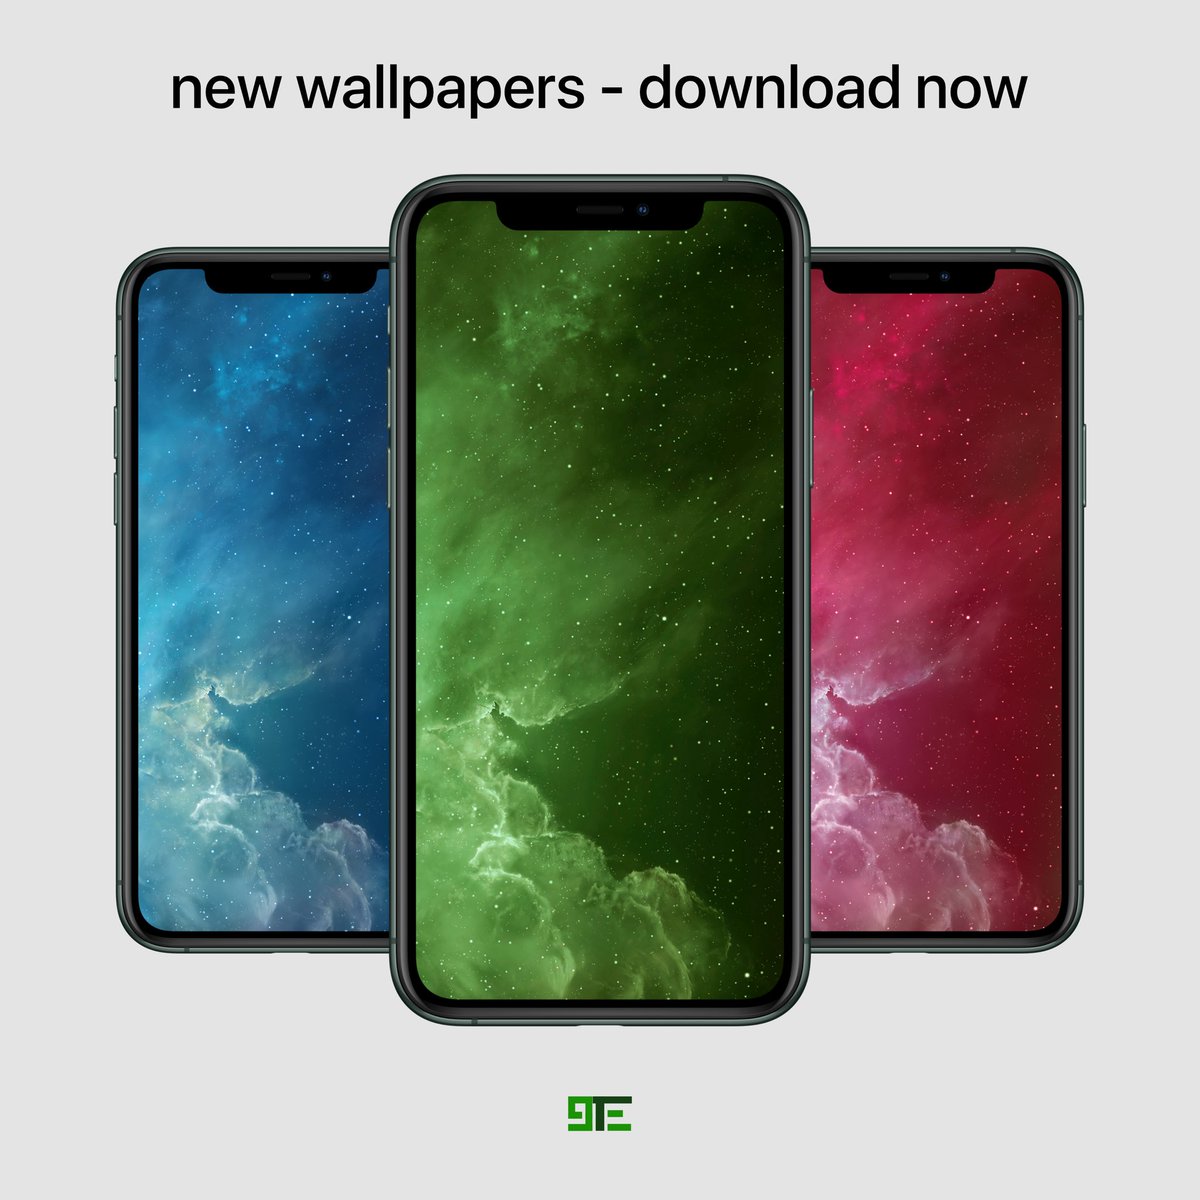 9techeleven Download These New Wallpapers For Your Iphone11 11 Pro Max All X Models Each Wallpaper Is Based On The Iphone 5 5s Wallpapers In Green Blue And Red Versions 1 Check